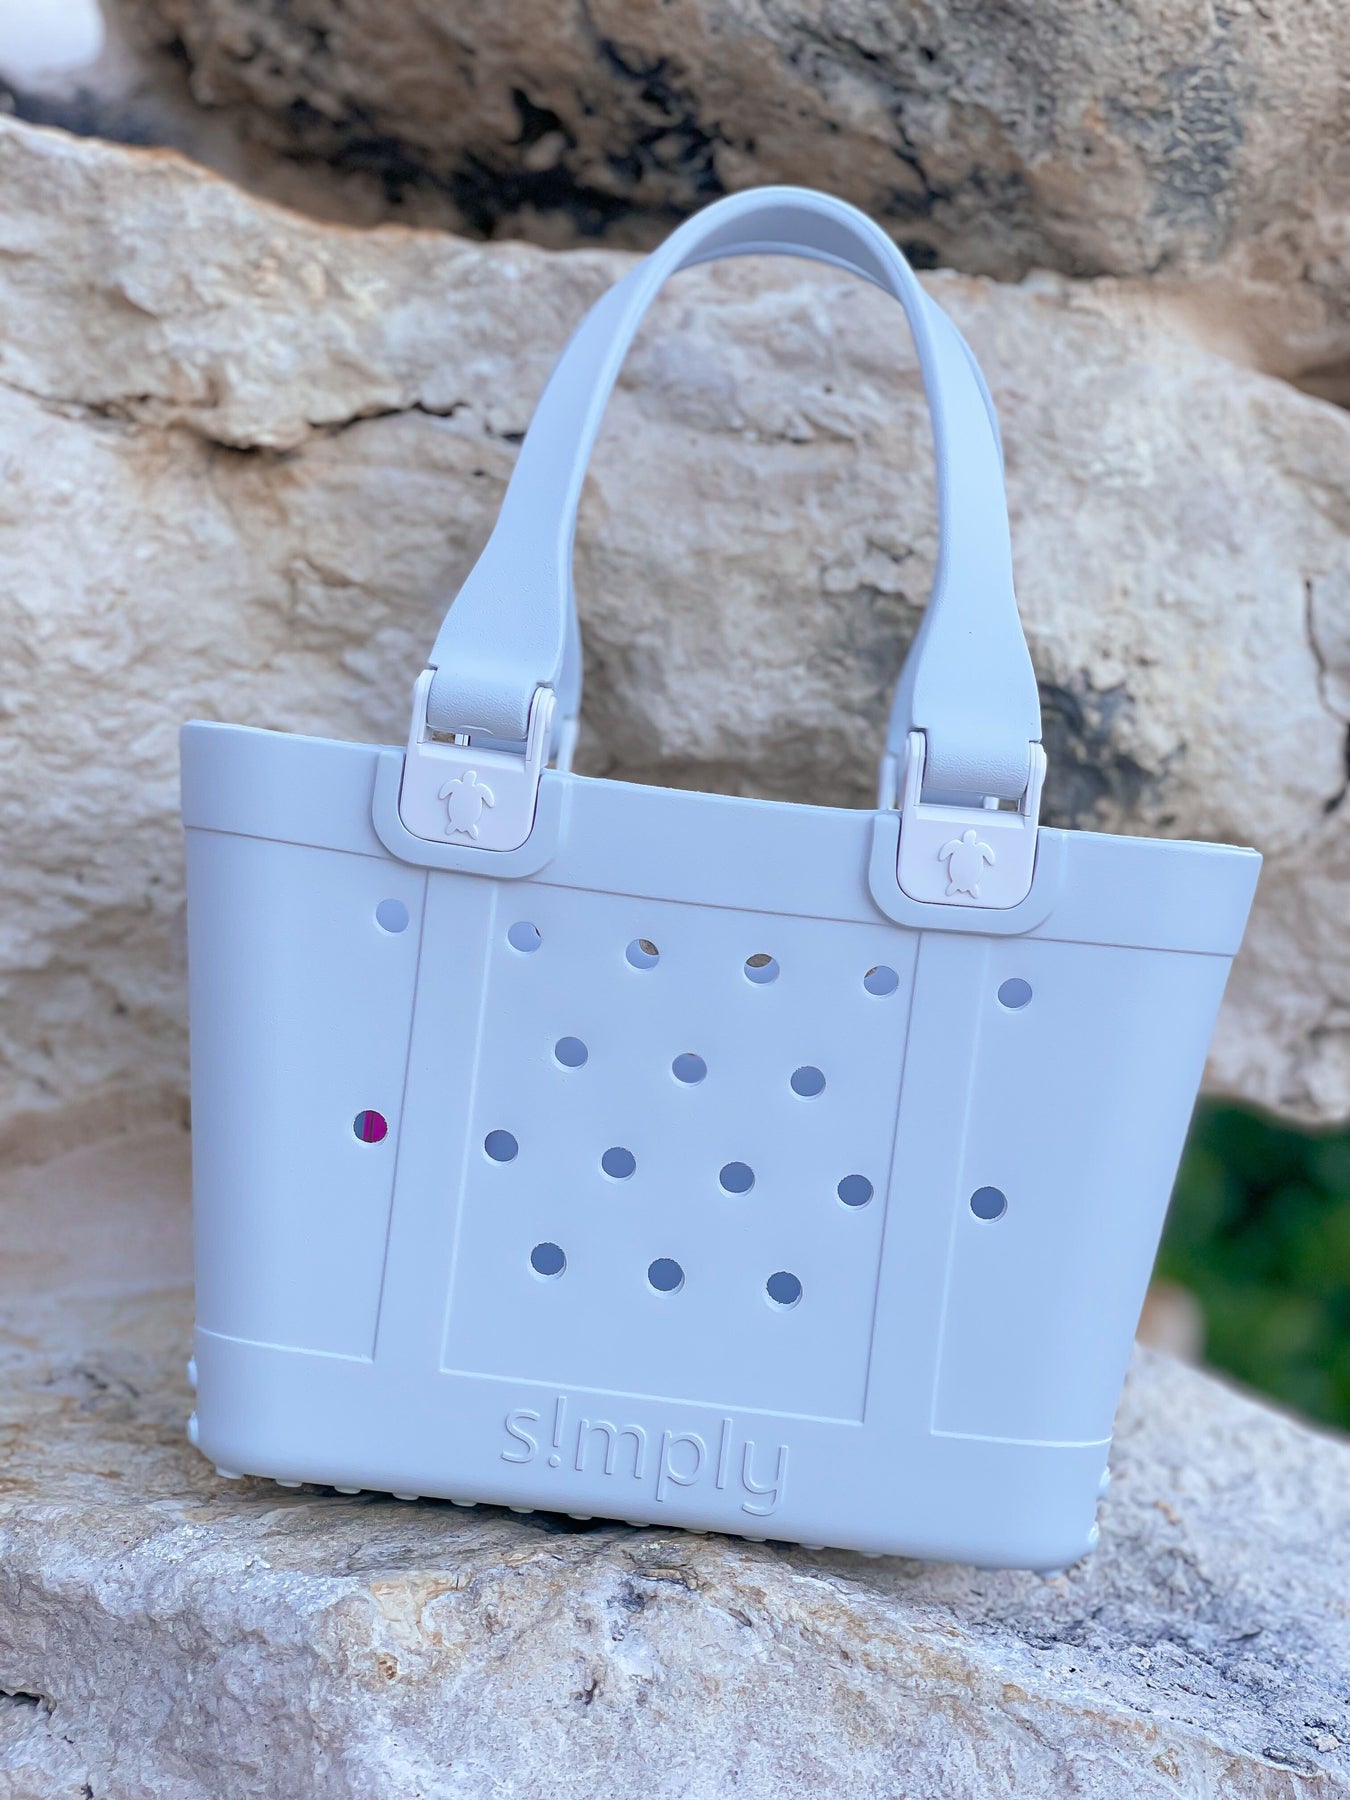 Simply Southern Tote in Orchid